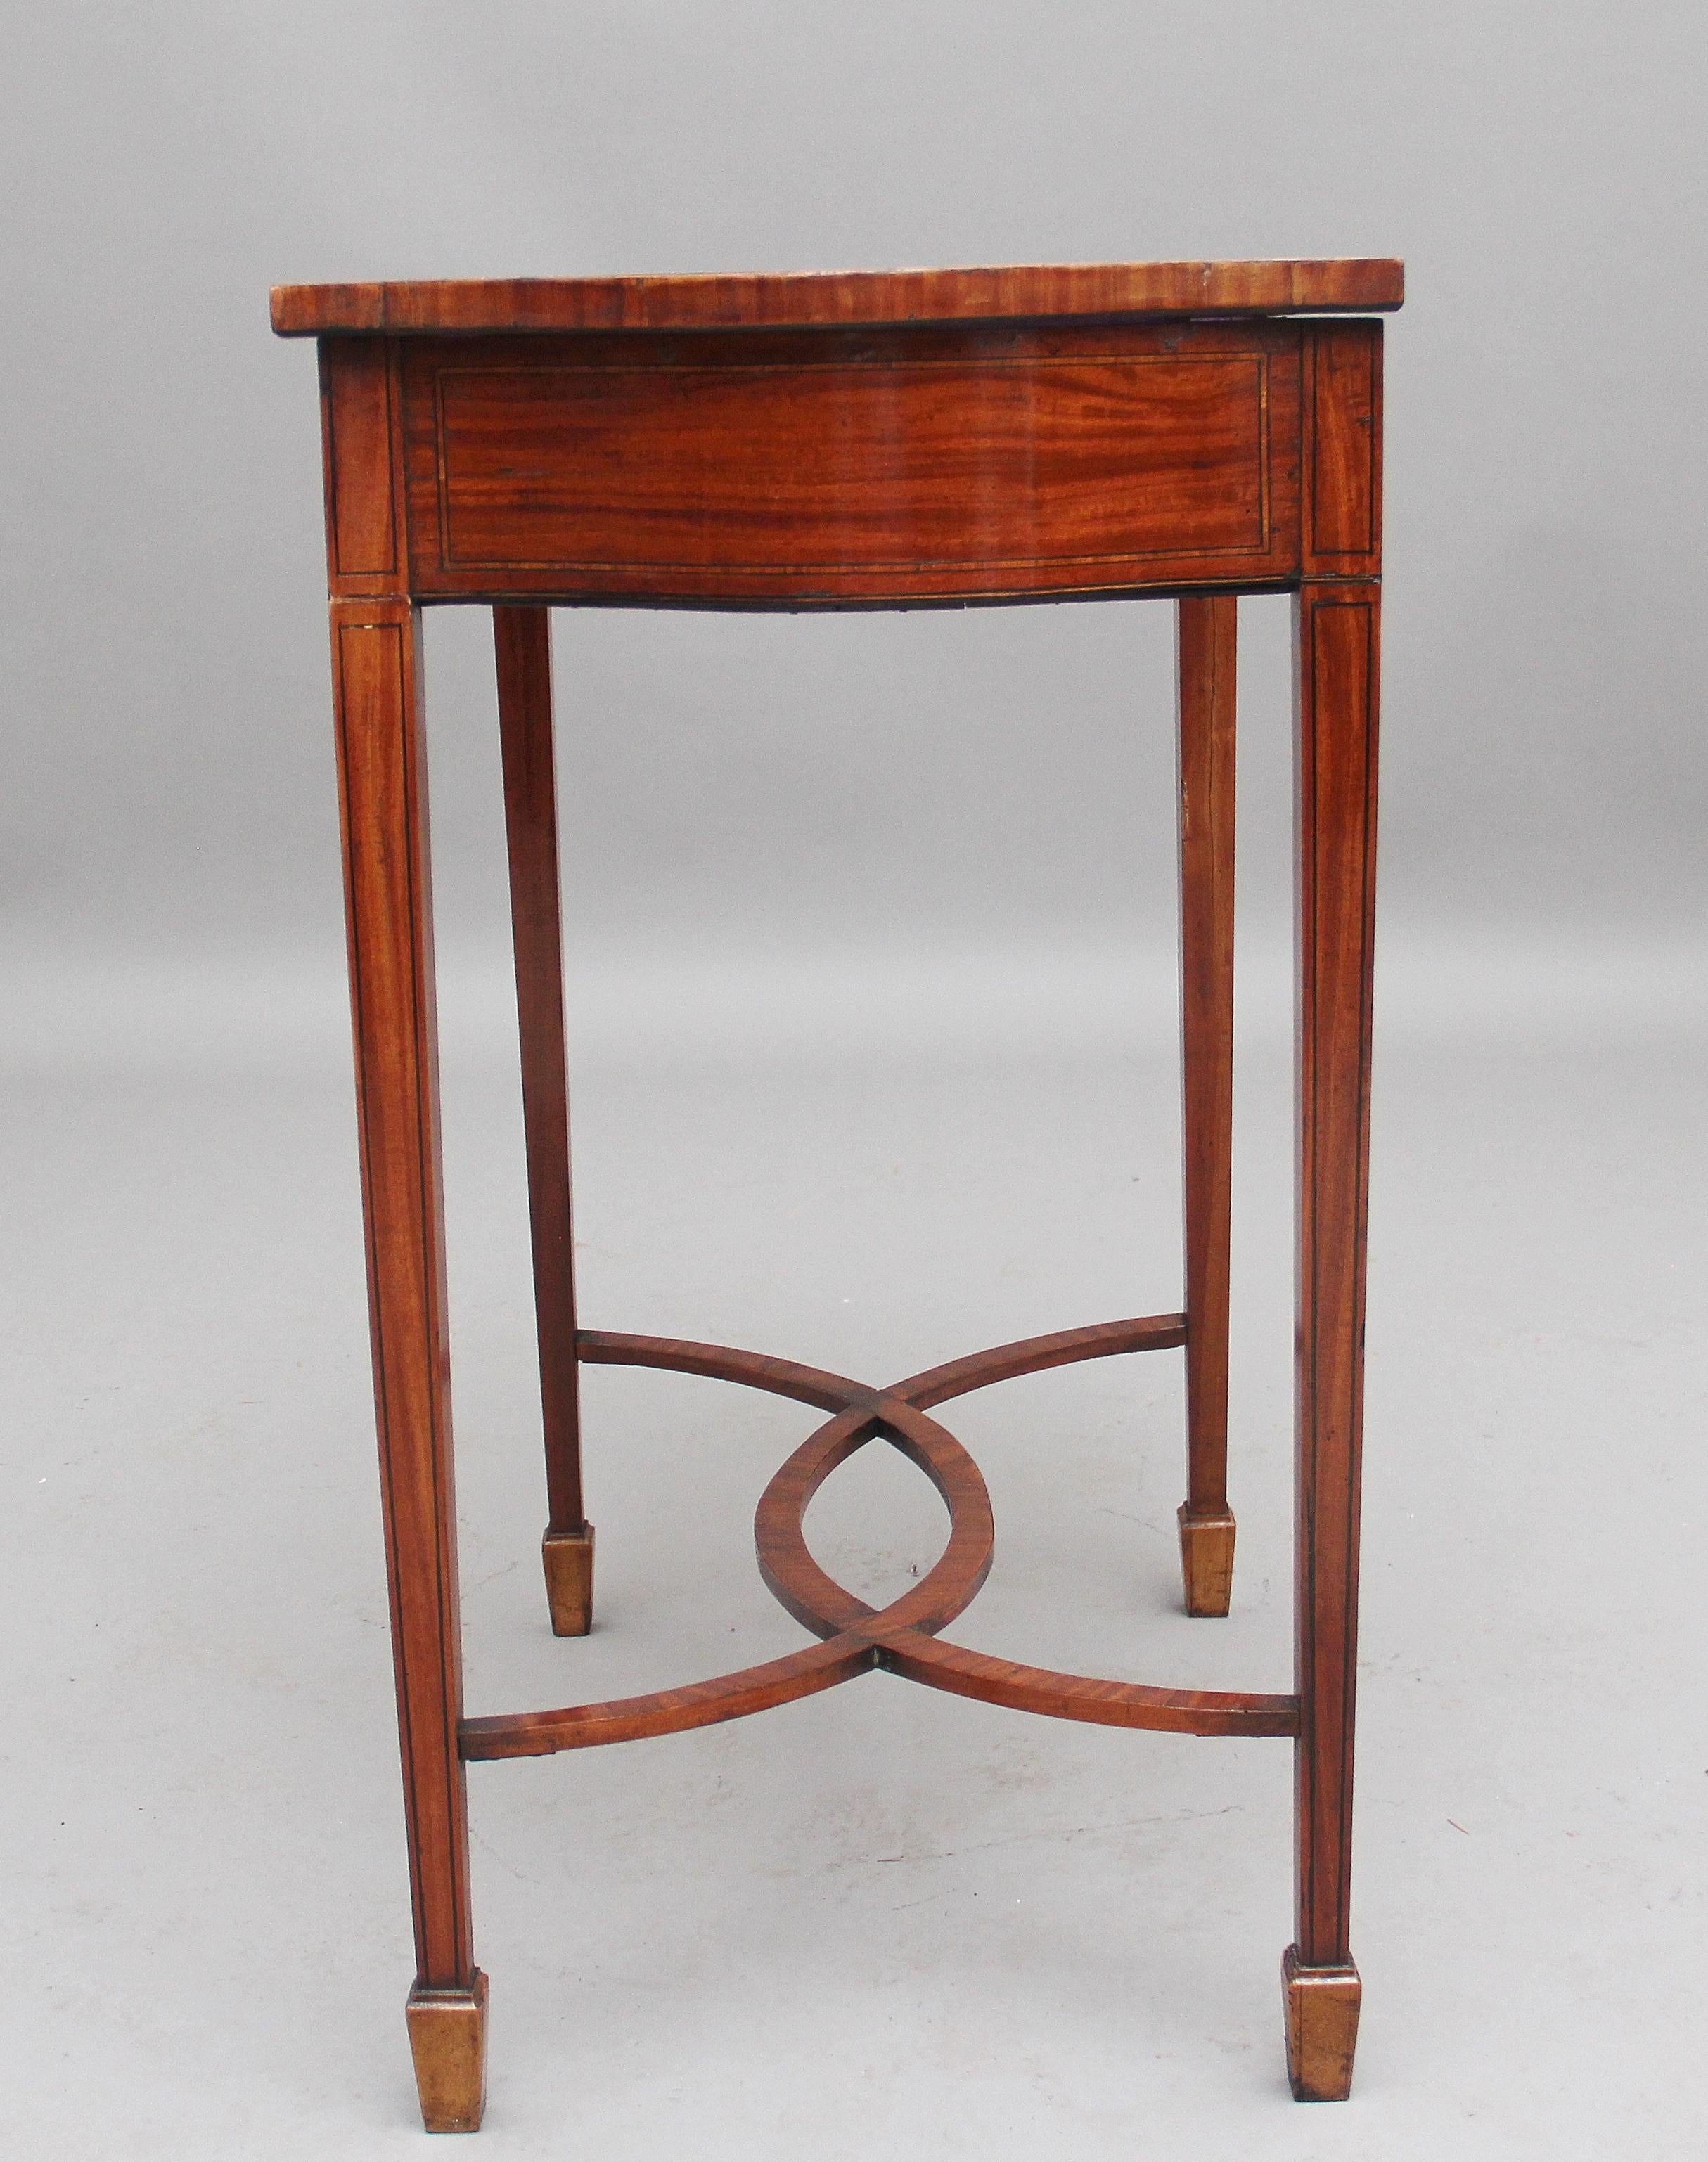 Edwardian Inlaid Satinwood Bijouterie Table For Sale 2